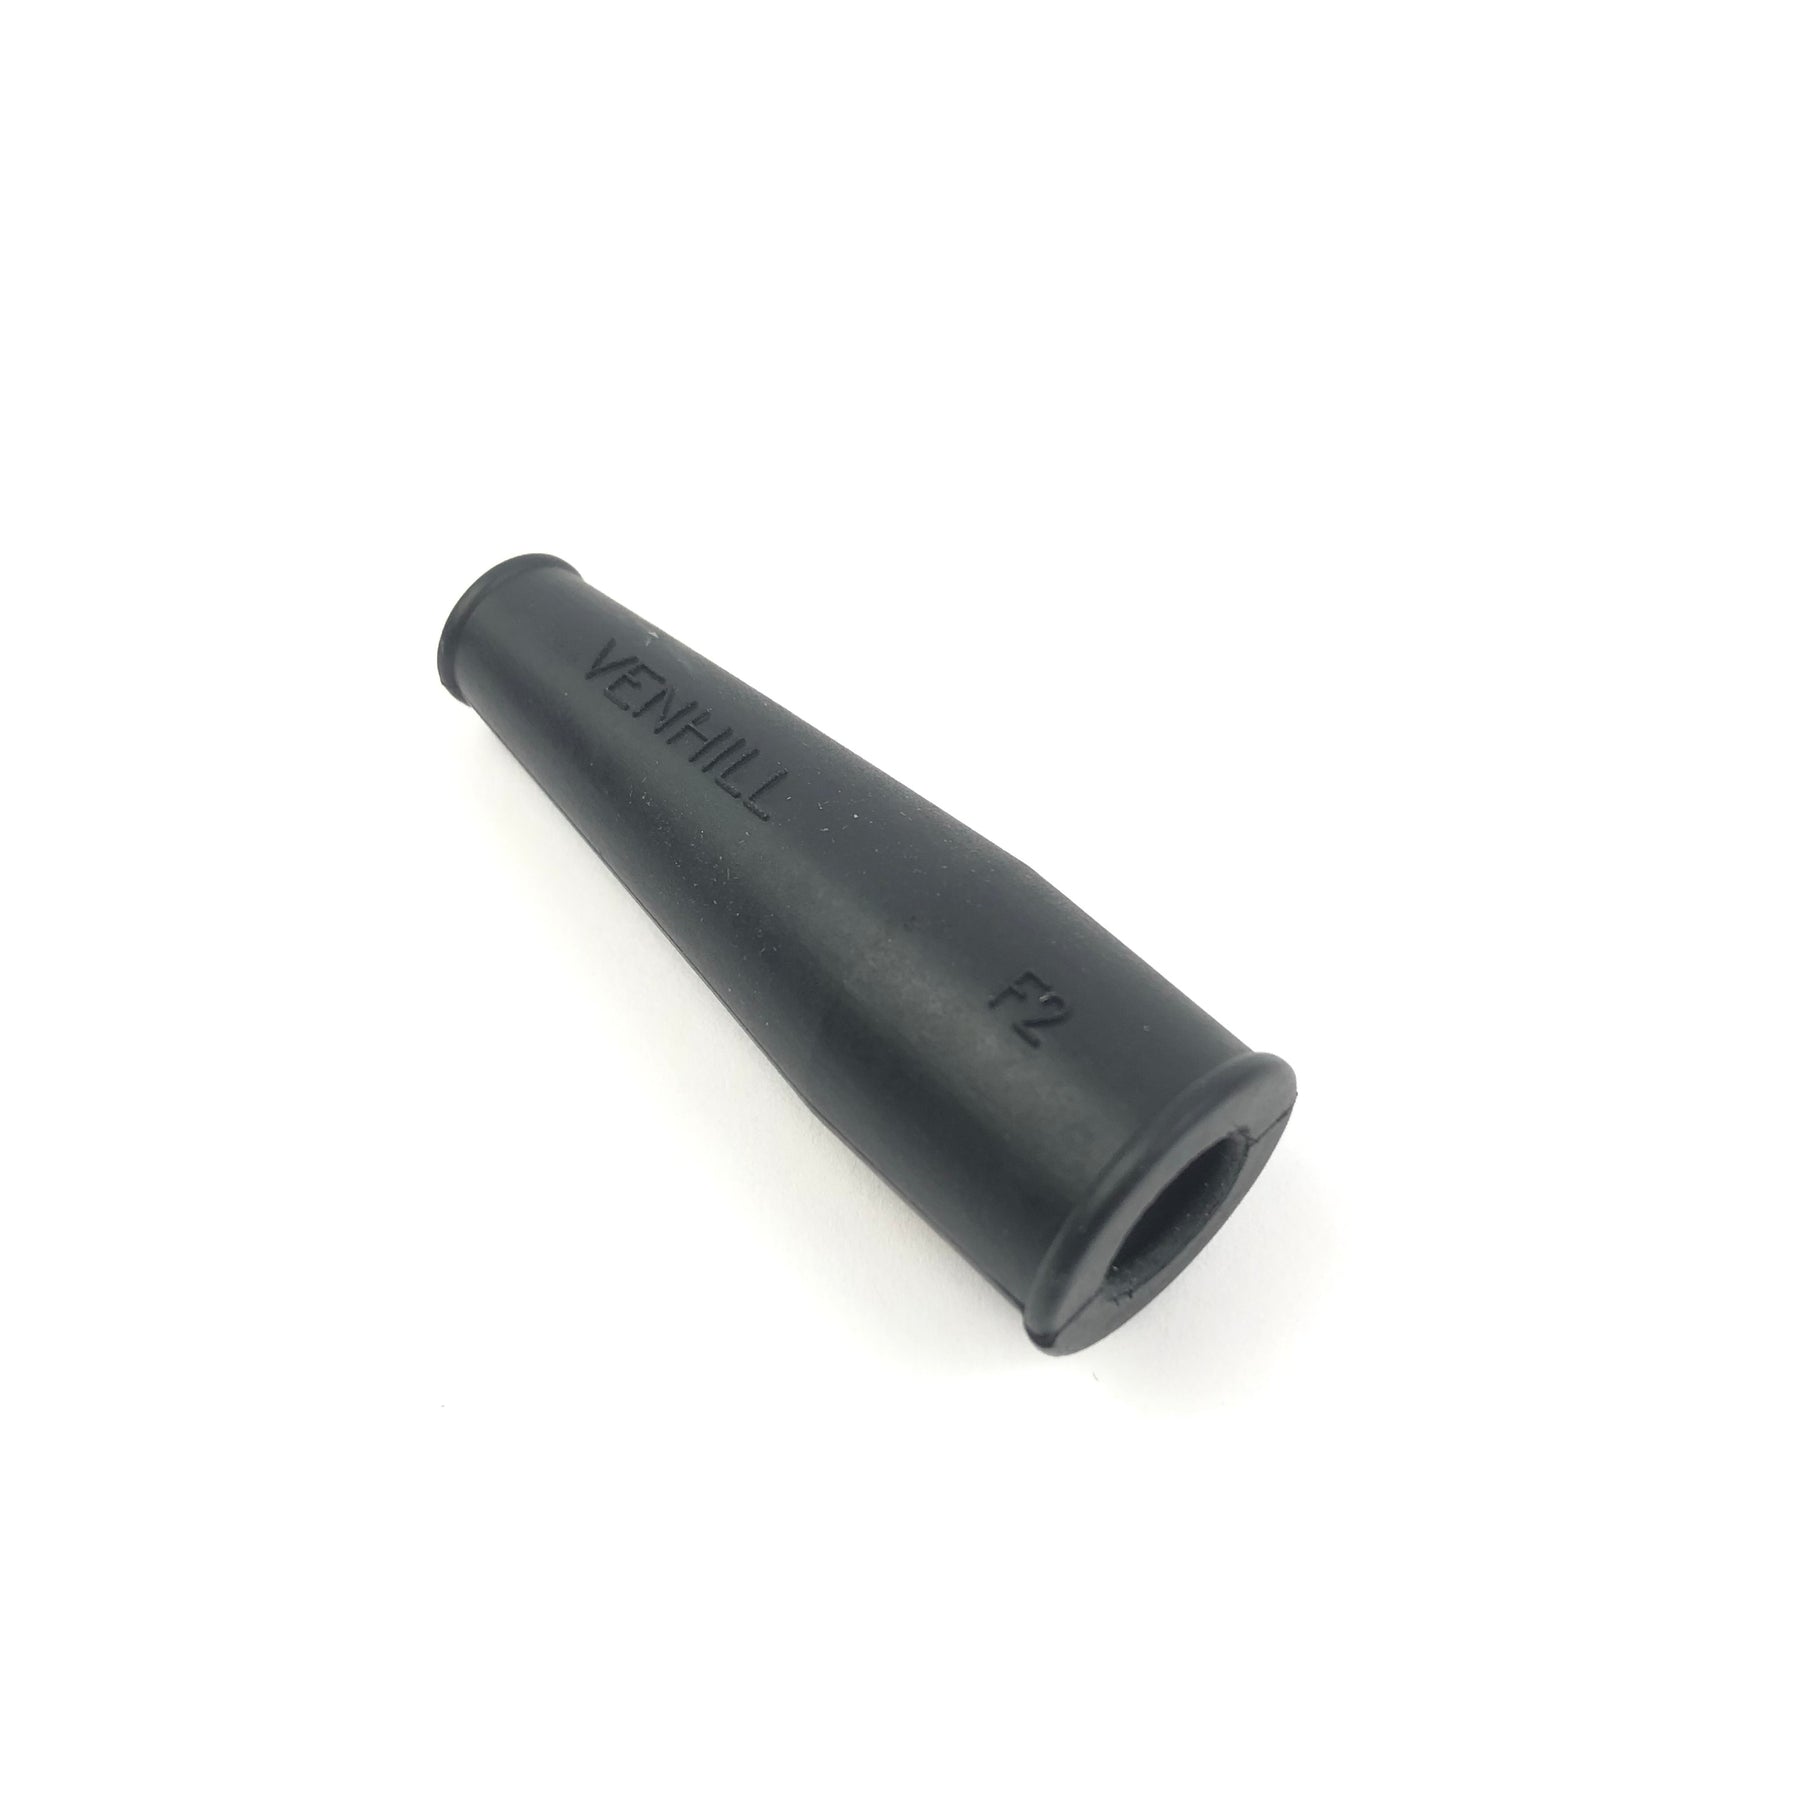 Rubber Sleeve Piece 14-932 measuring 57mm x 19mm